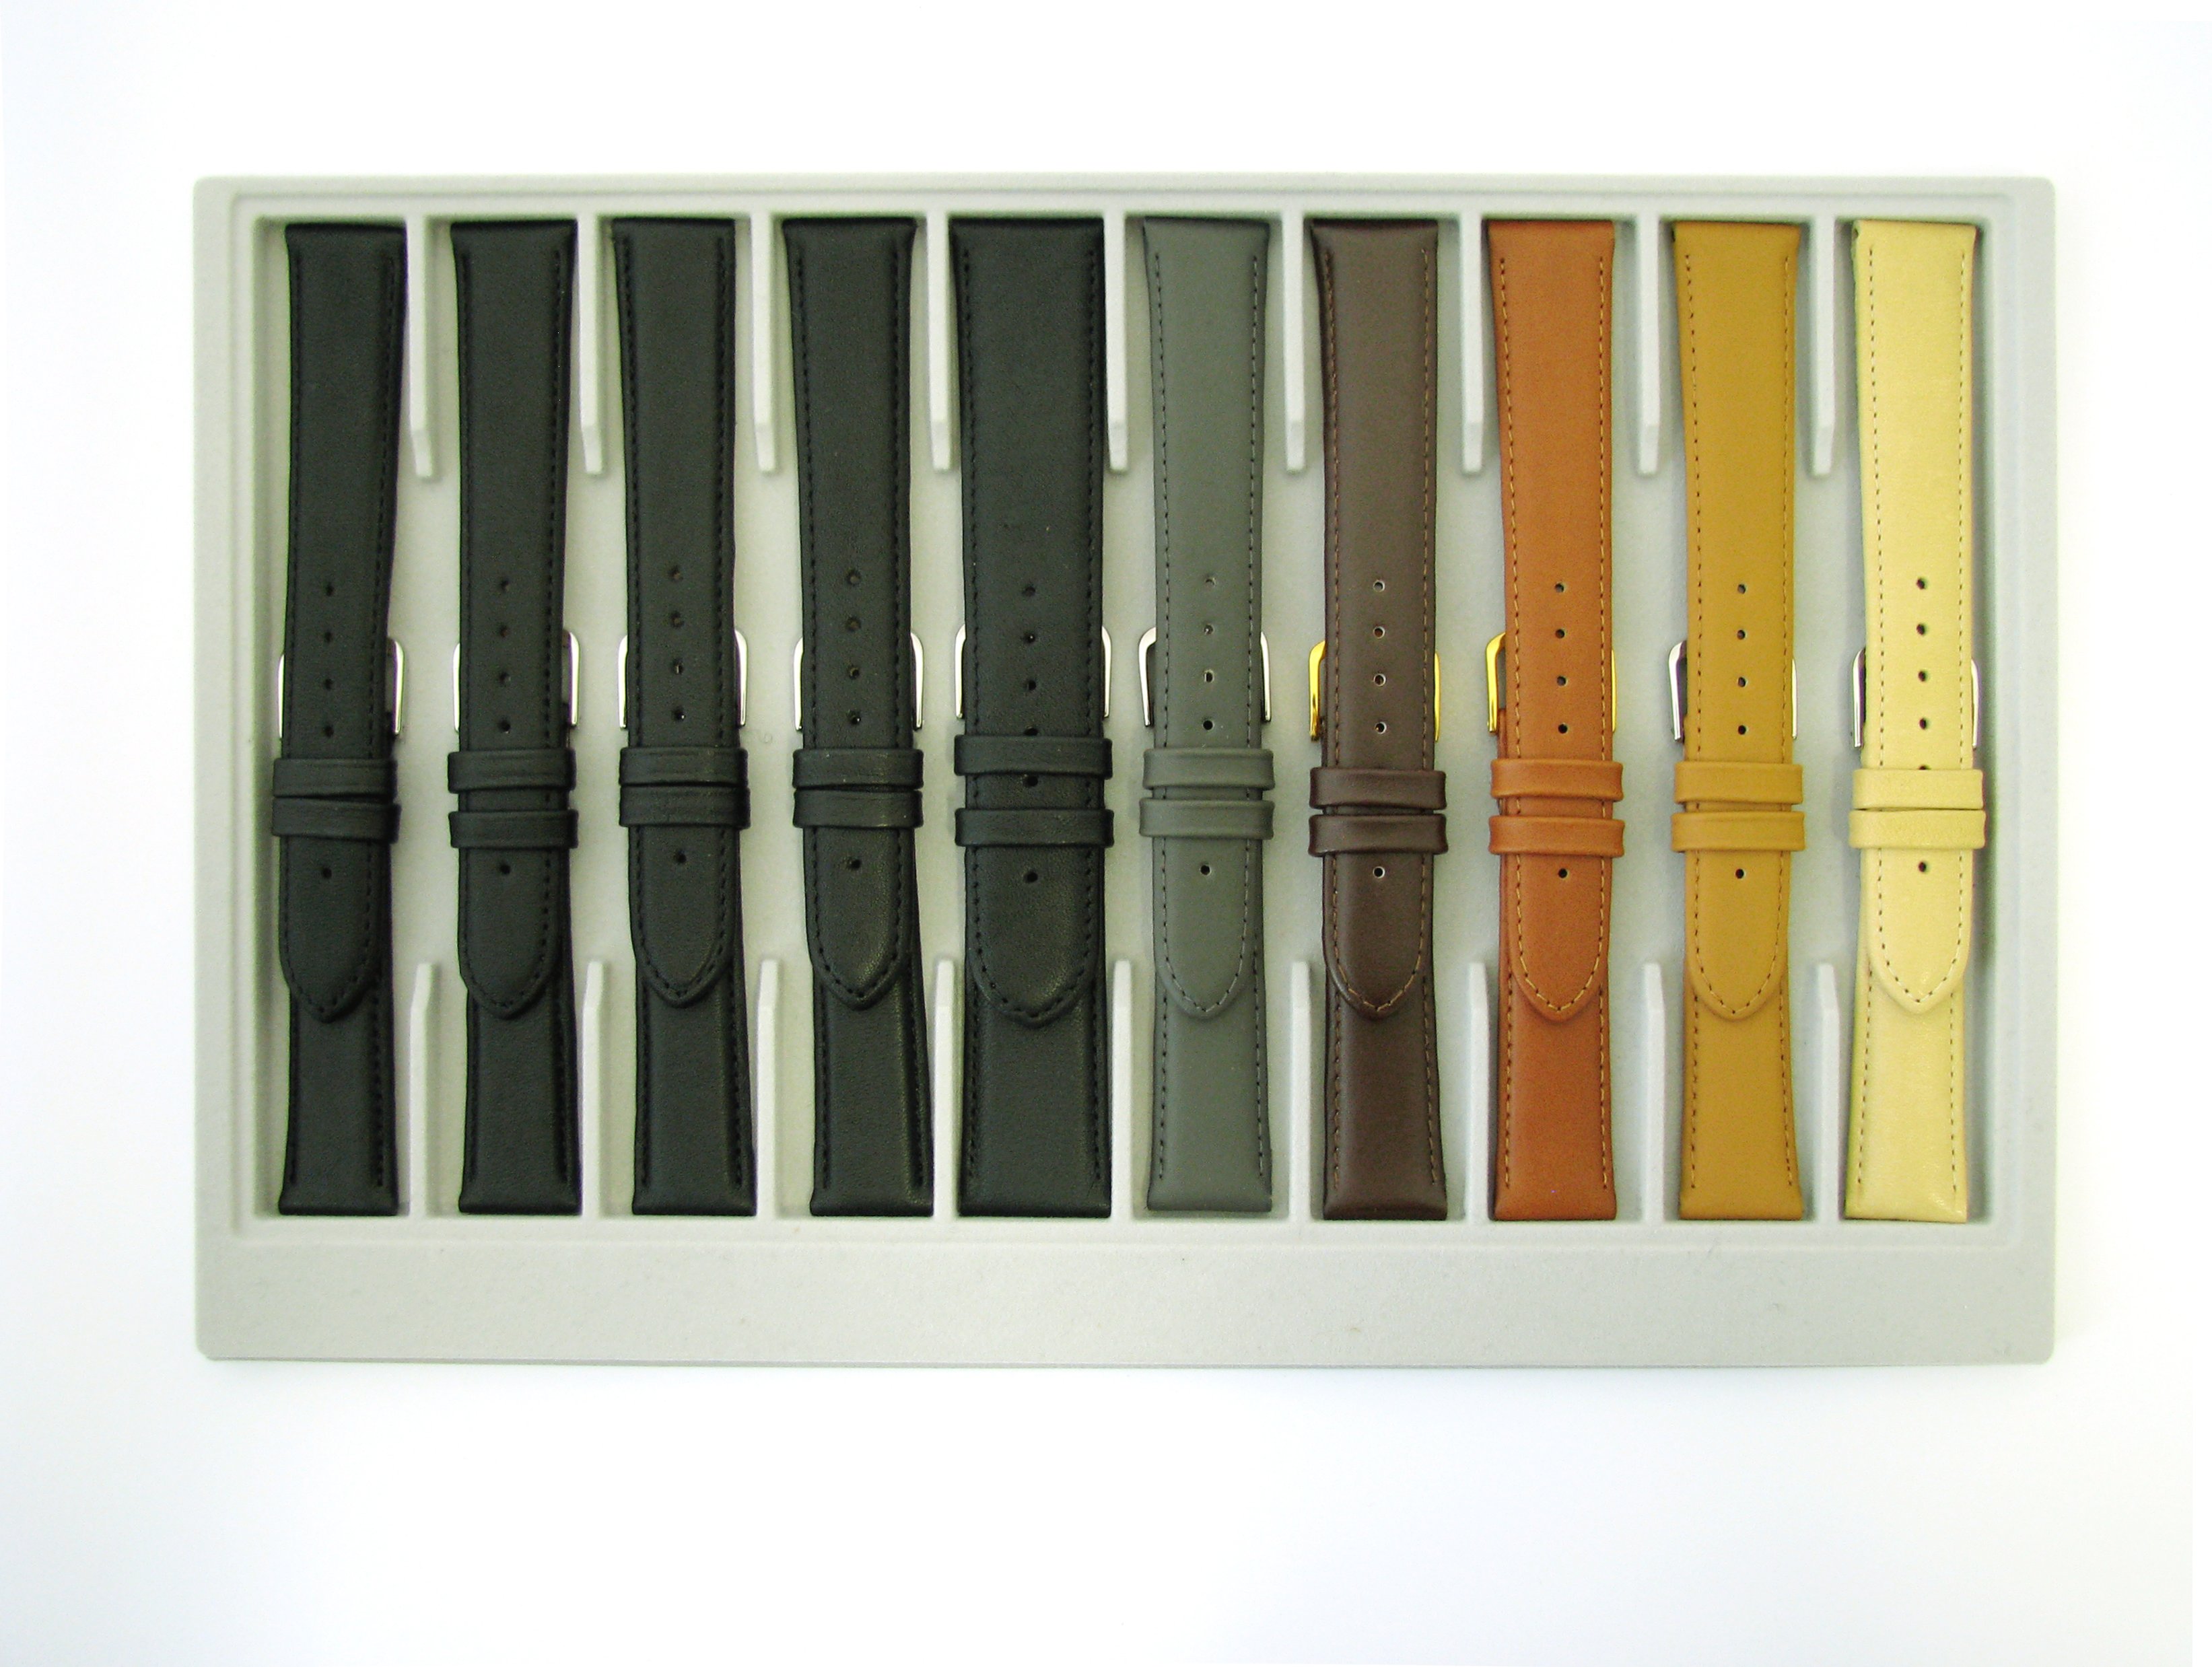 Leather bands, 10-piece card, Polo, extra-soft, 18-22mm, black, dark brown, medium brown, light brown, beige